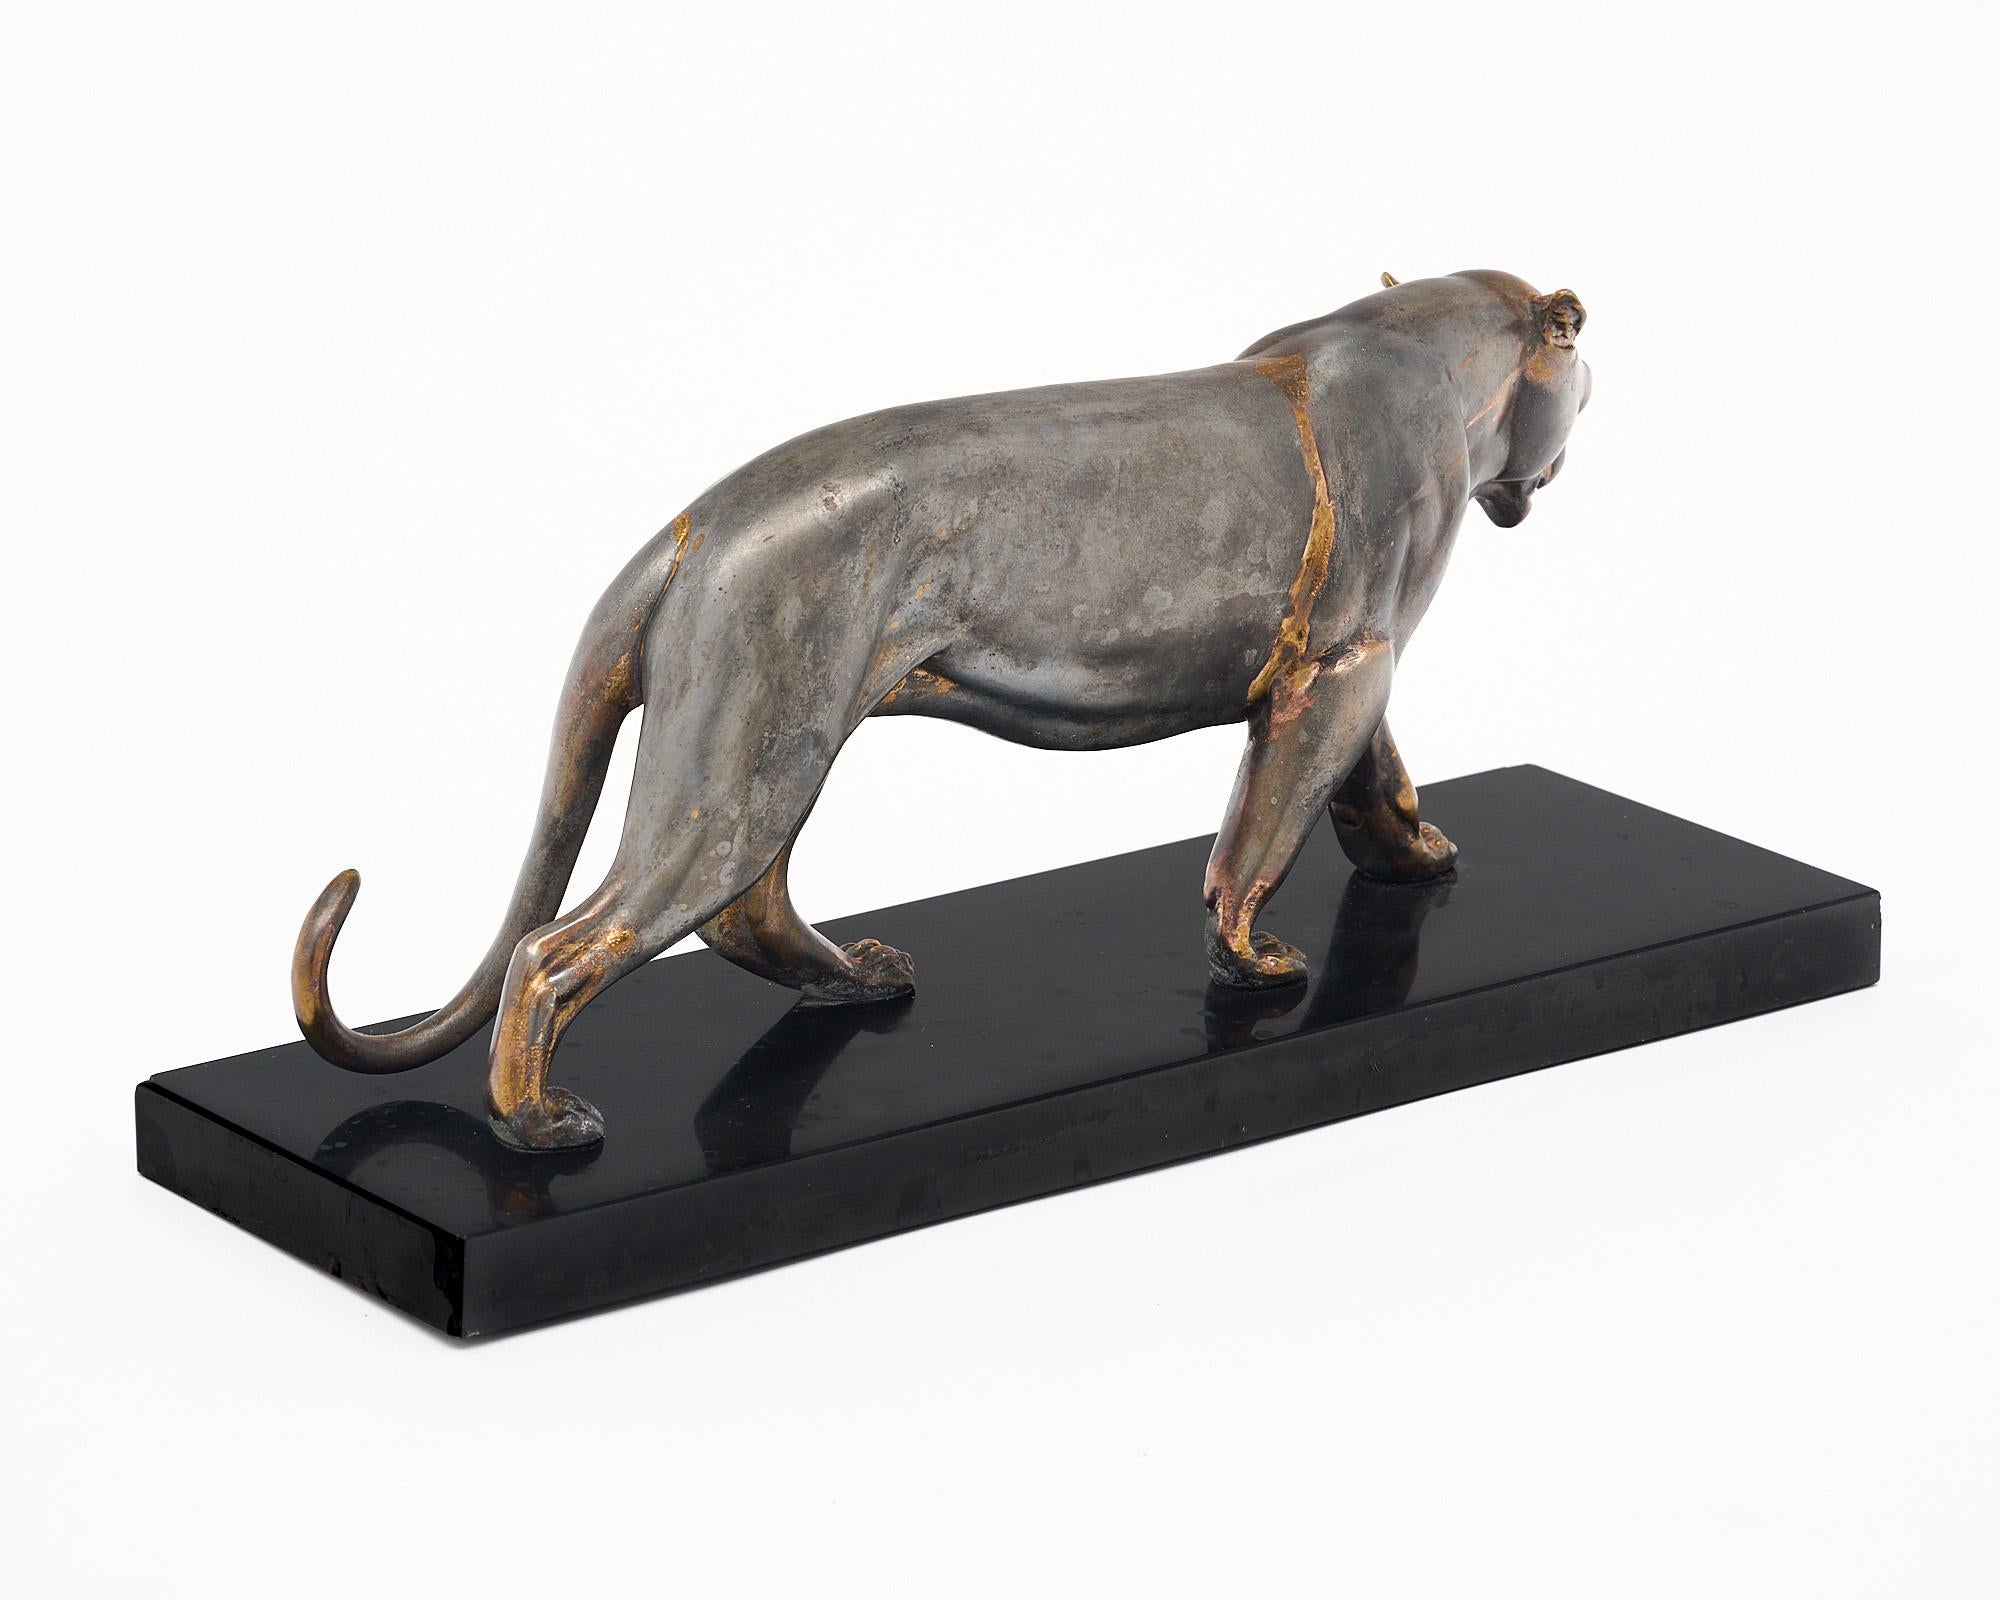 Mid-20th Century French Art Deco Period Panther Statue For Sale